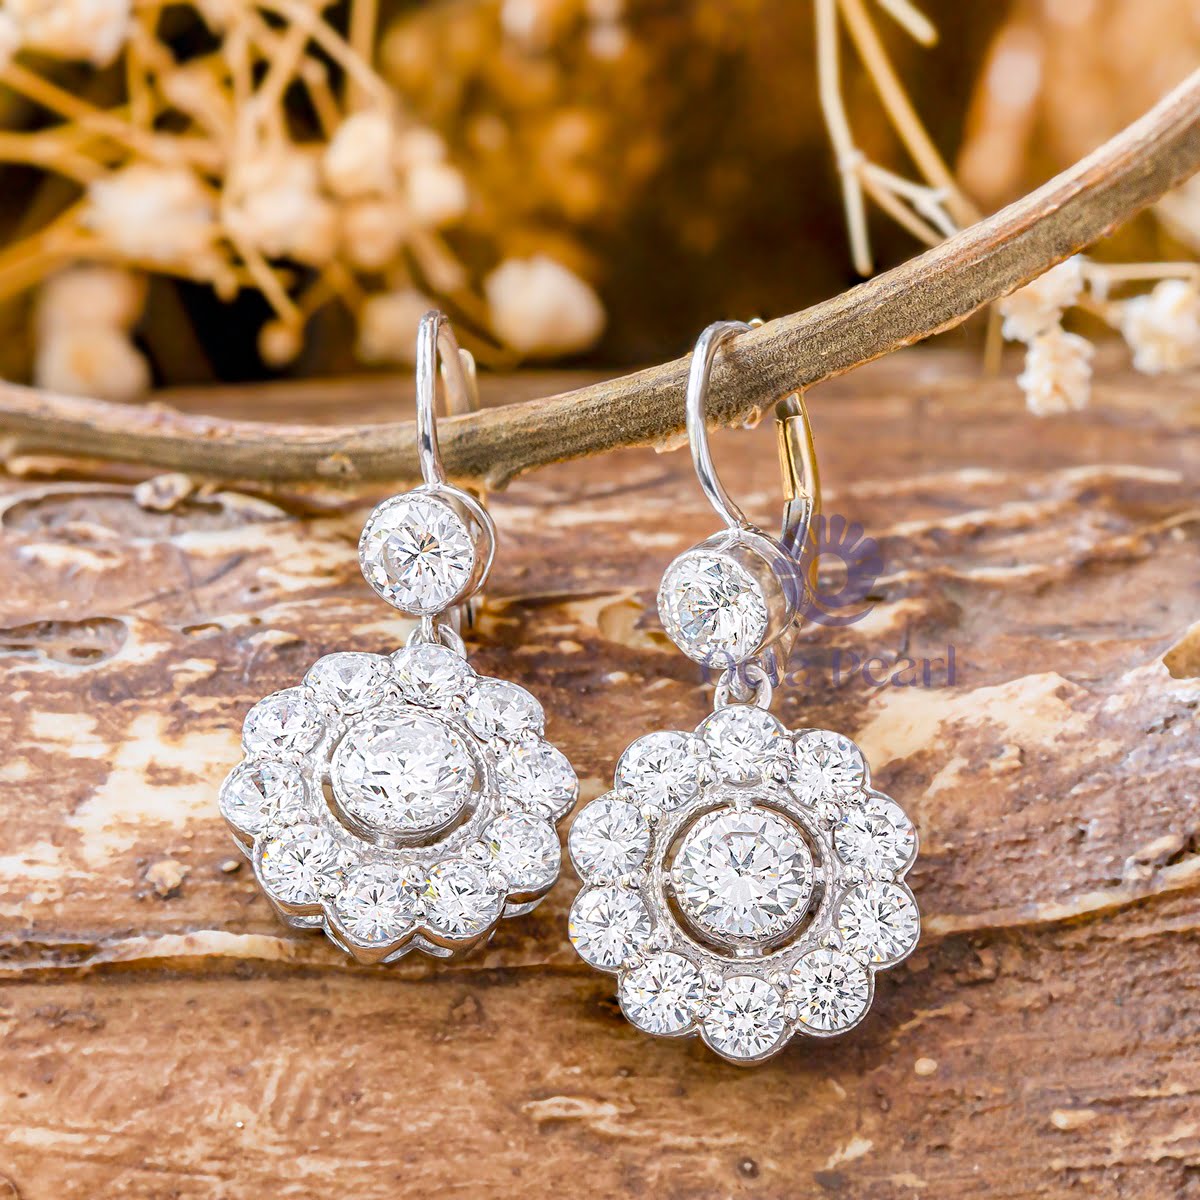 Two Tone Round Cut Moissanite Floral Inspire Earlobe Lever Back Drop Dangle Earring (4 1/4 TCW)